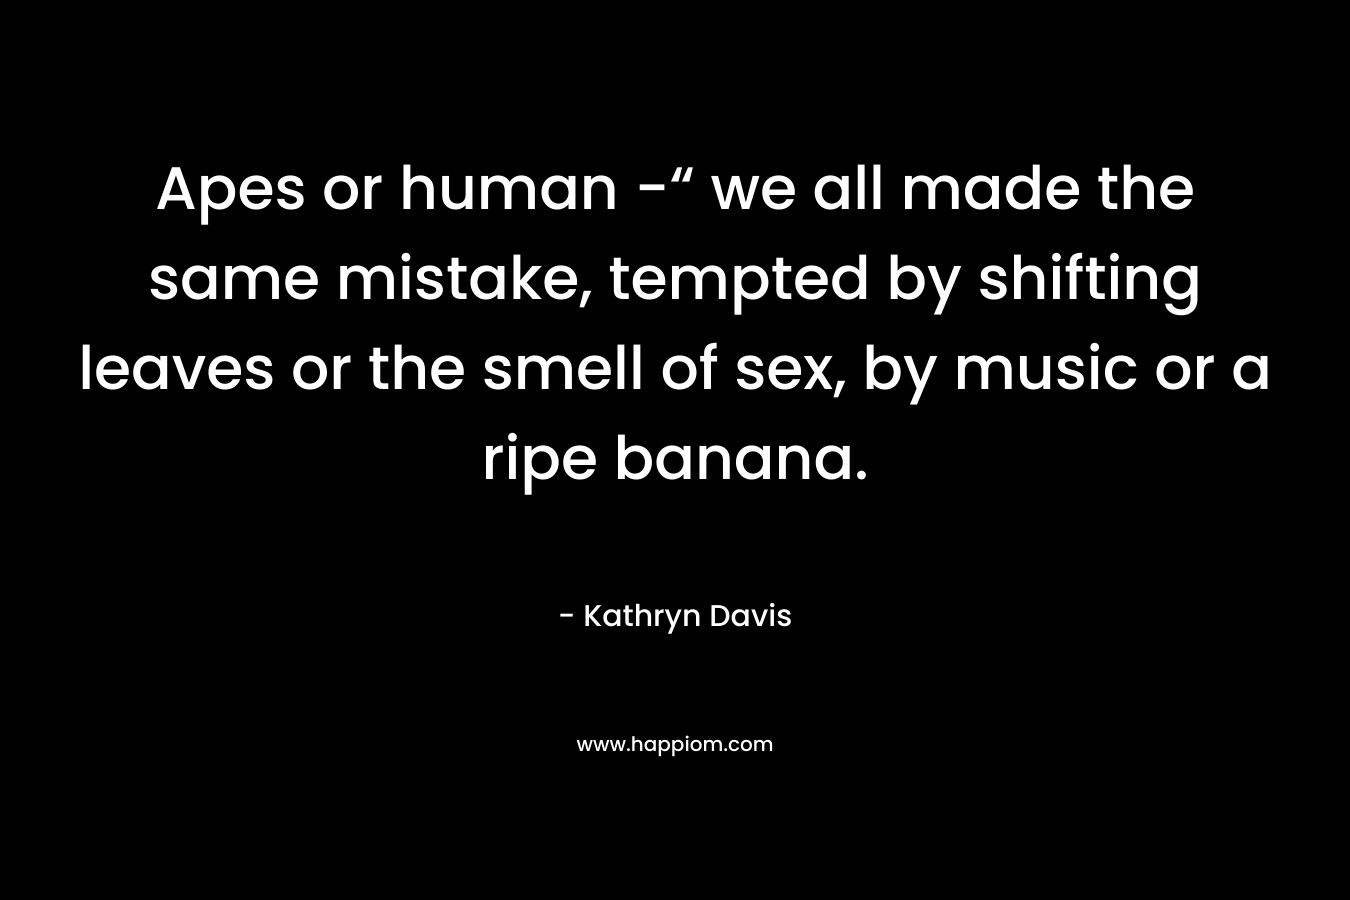 Apes or human -“ we all made the same mistake, tempted by shifting leaves or the smell of sex, by music or a ripe banana. – Kathryn Davis